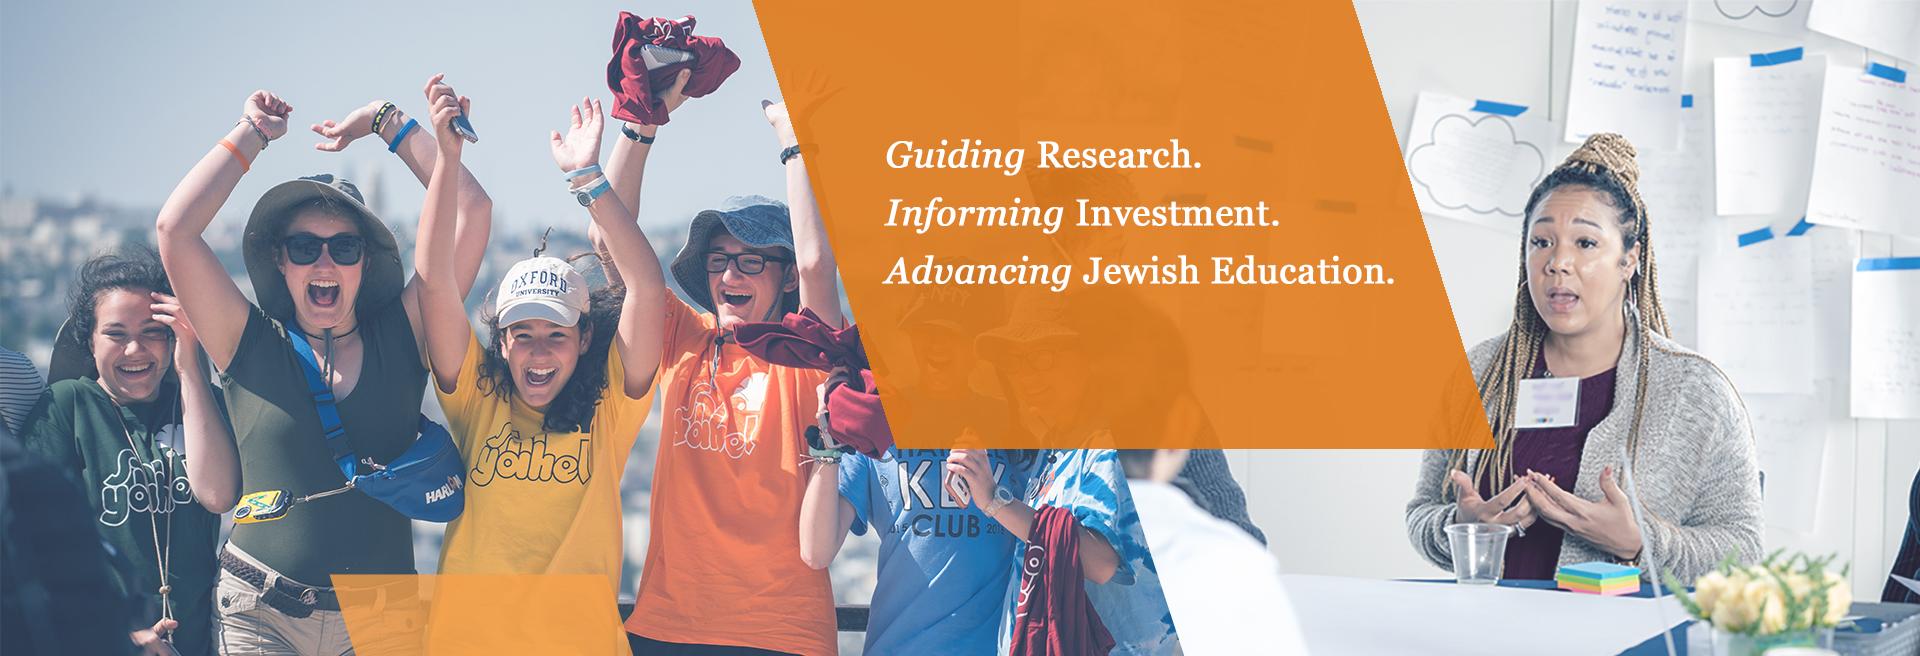 Decorative header that includes two photos in the background. One photo is of children with heir hands in the air, the other is off a professional. An orange background behind text that reads "Guiding Research. Informing Investment. Advancing Jewish Education."